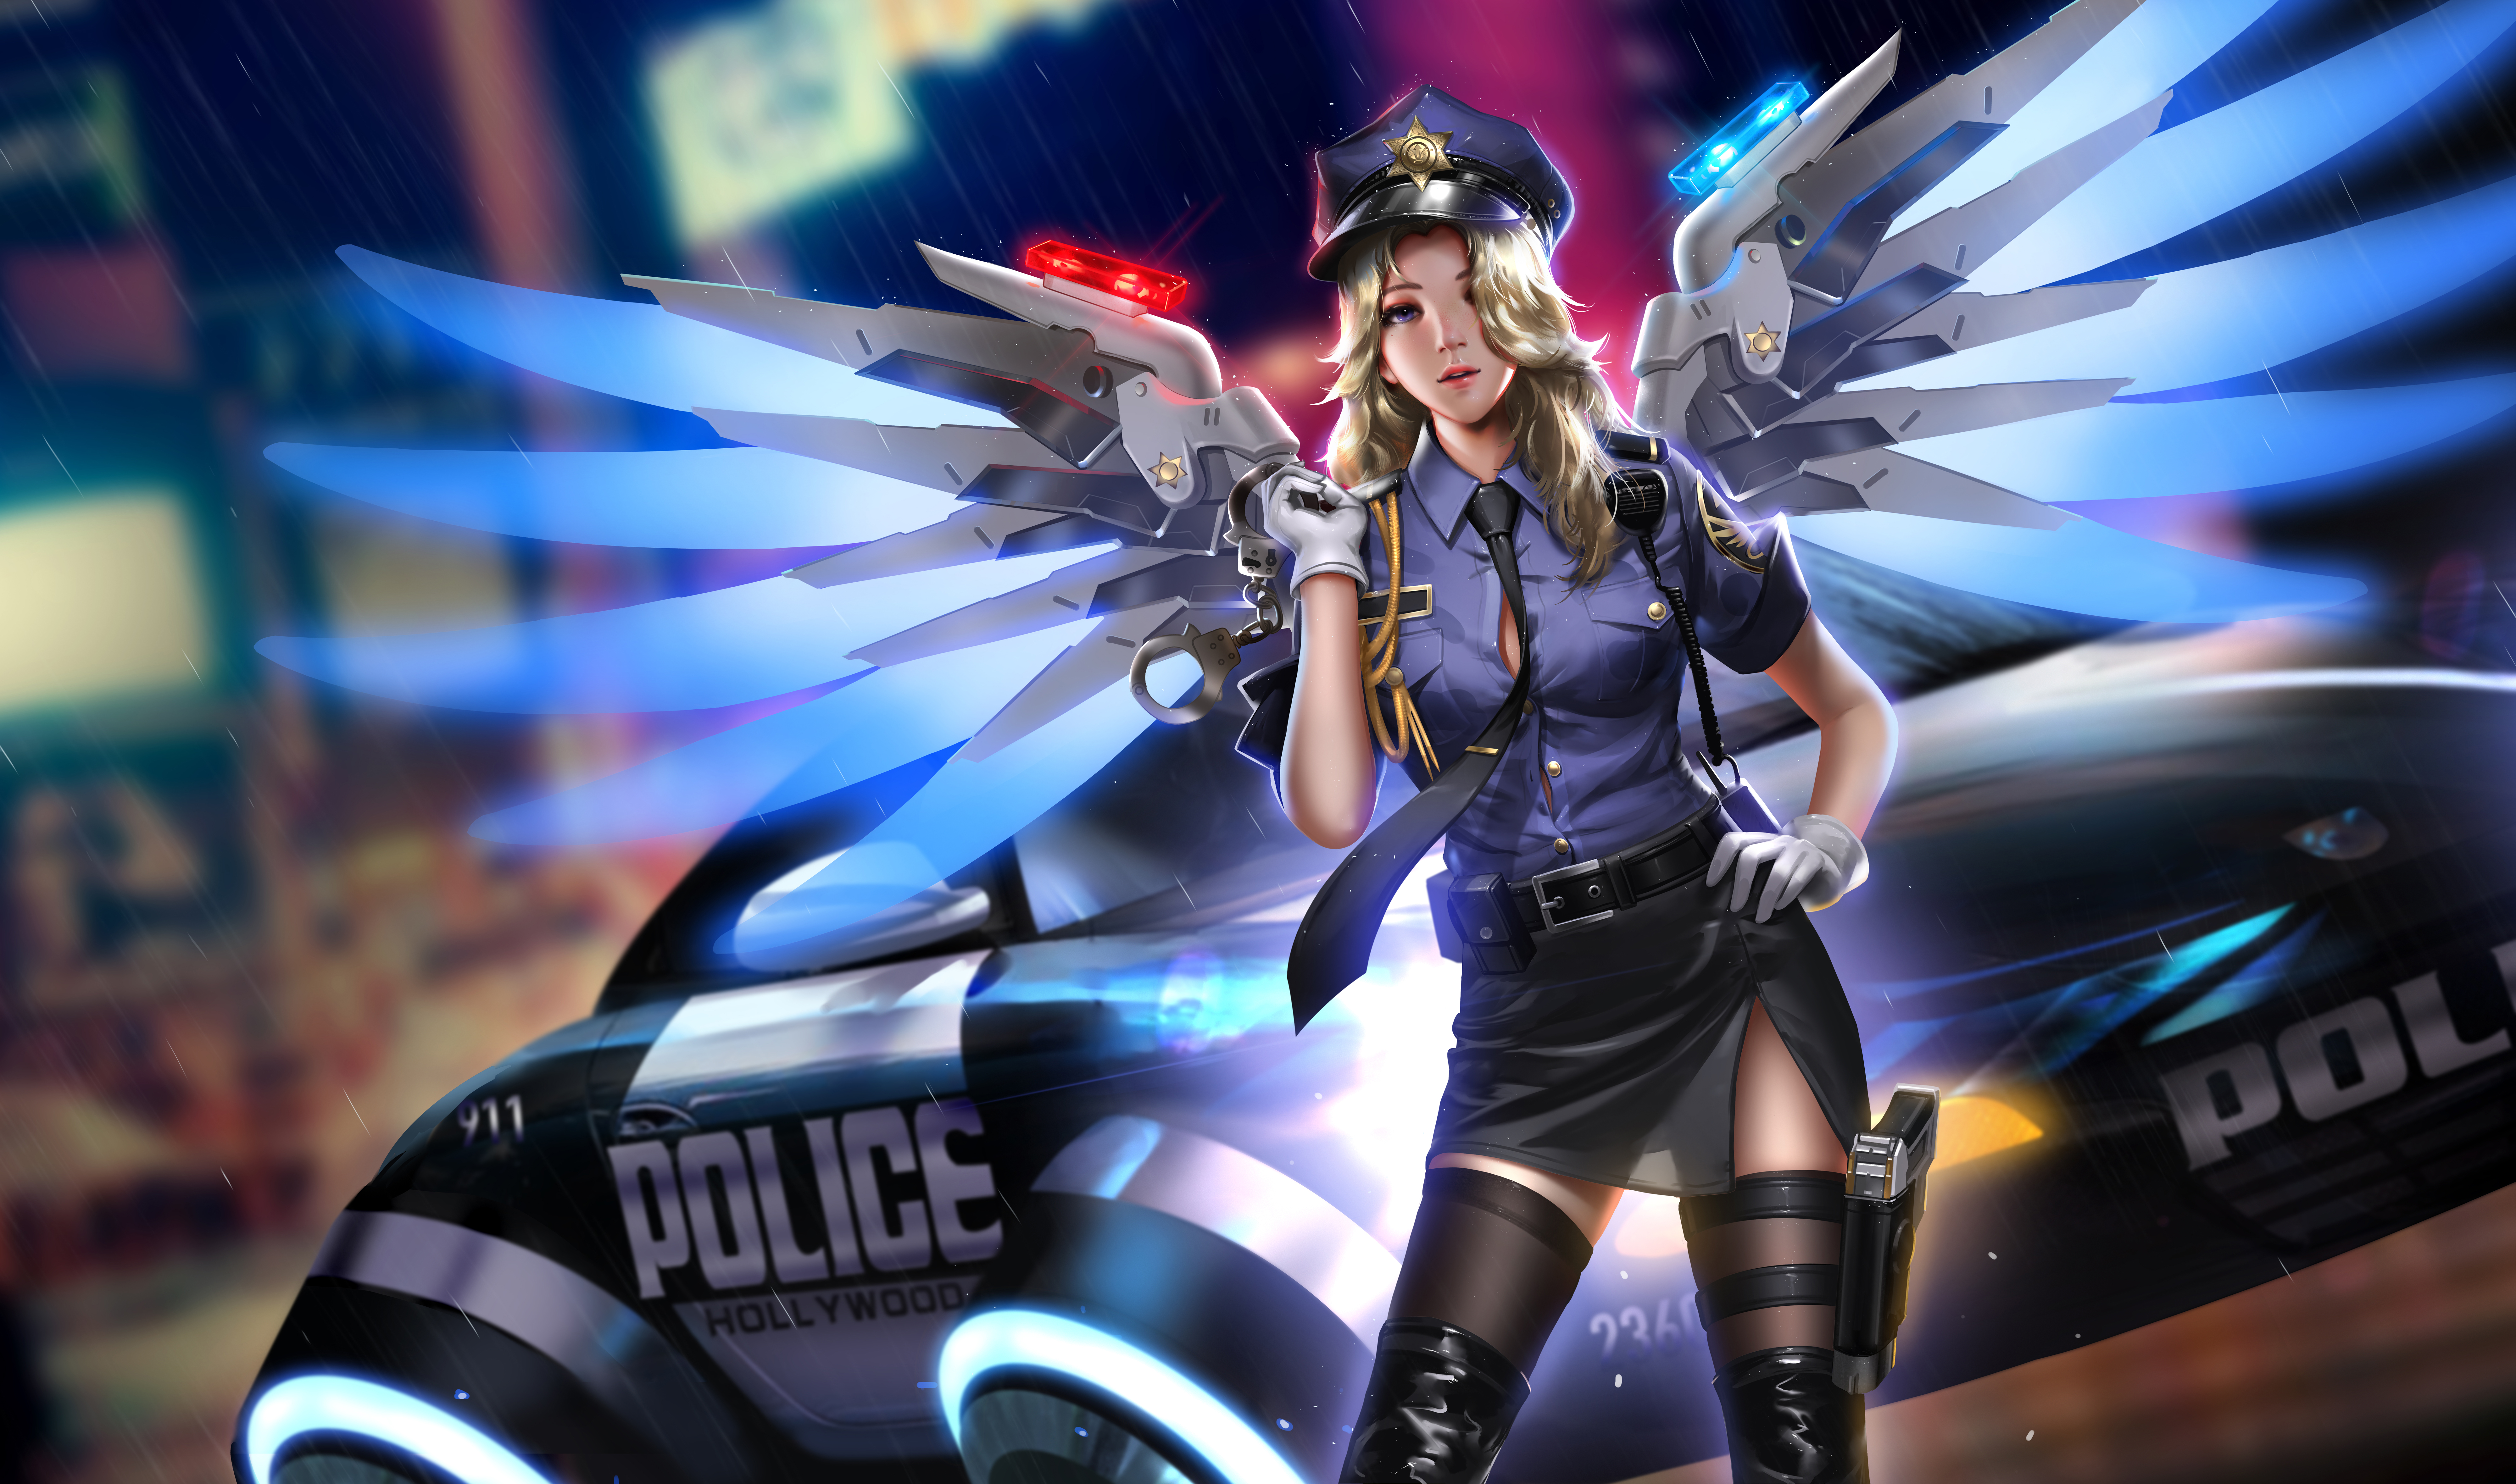 General 8000x4720 Mercy (Overwatch) Overwatch video games video game girls berets video game characters blonde police women wings stockings knee-high boots car police cars futuristic cyberpunk night rain artwork drawing digital art illustration fan art Jason Liang